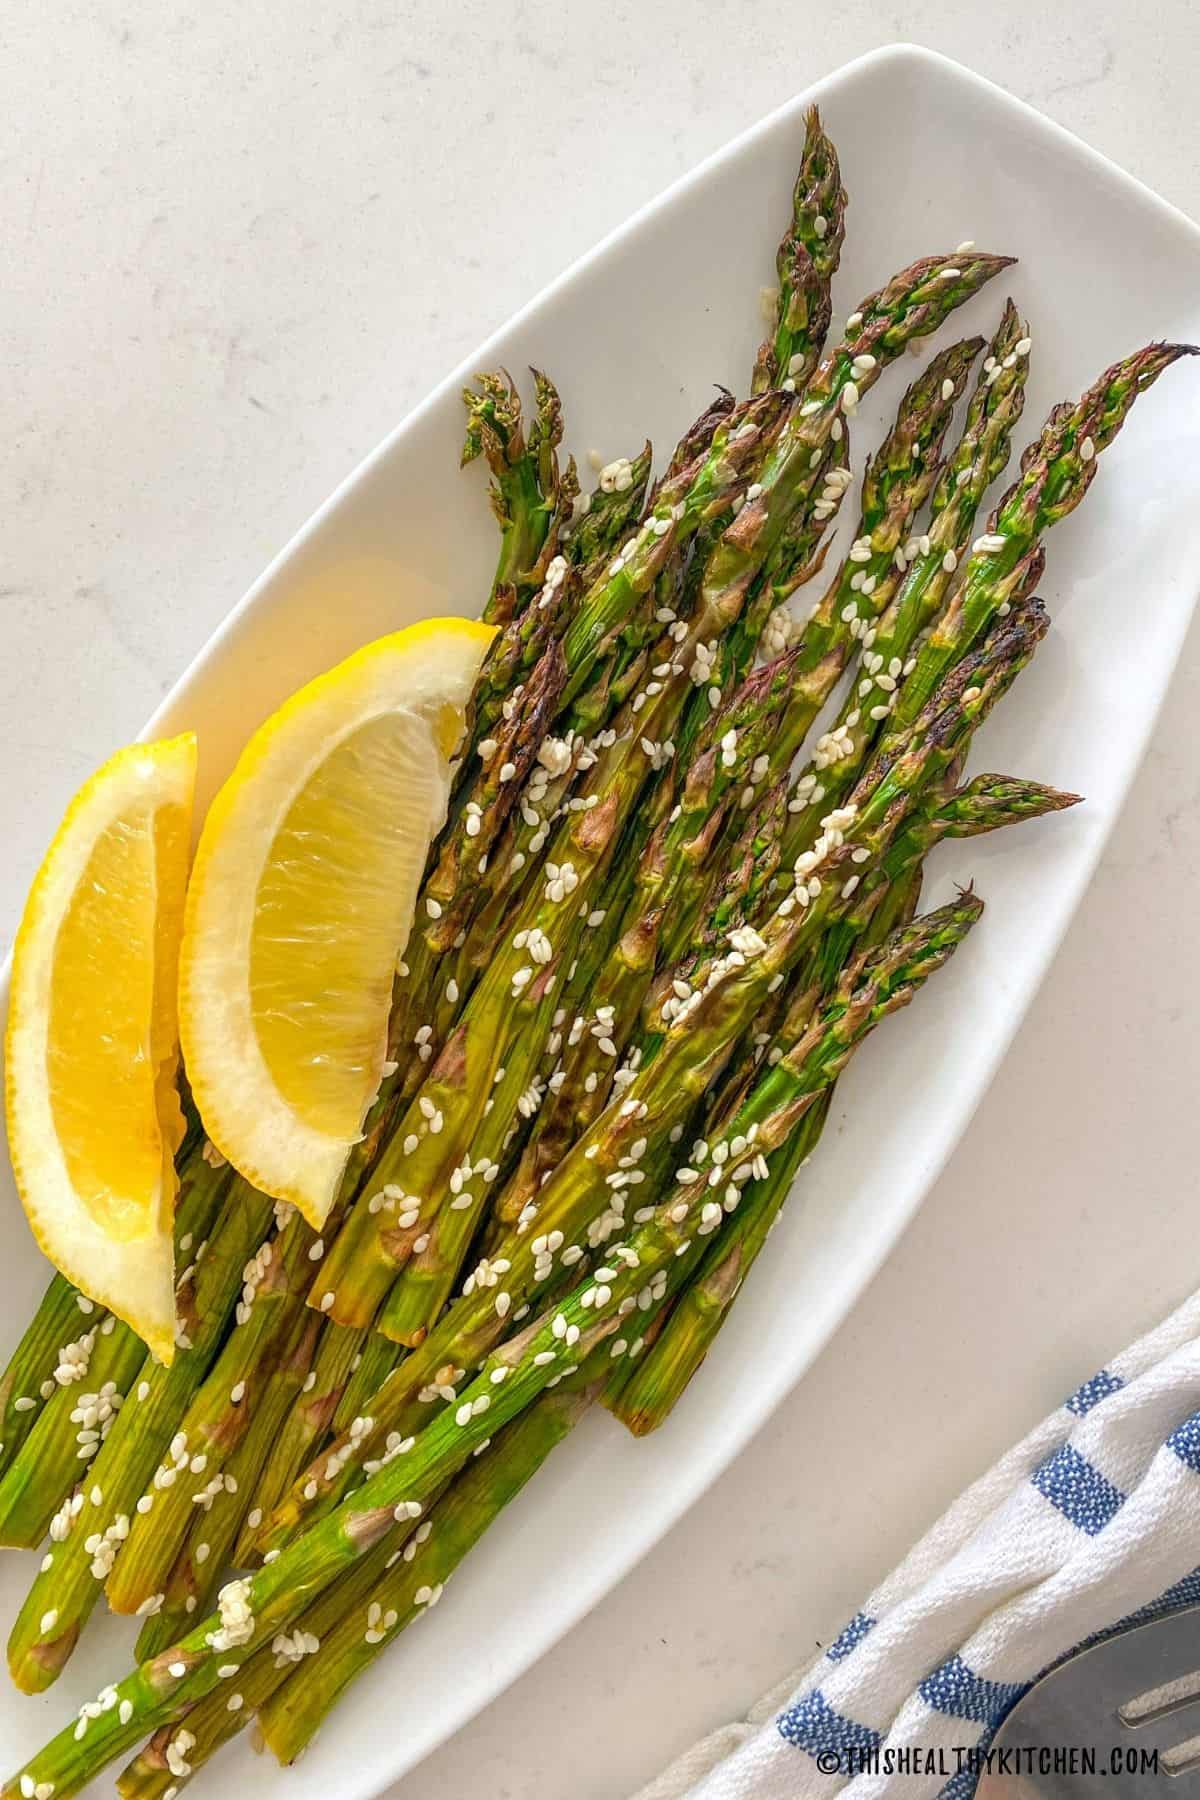 Roasted asparagus with sesame seeds and lemon wedges in white dish.